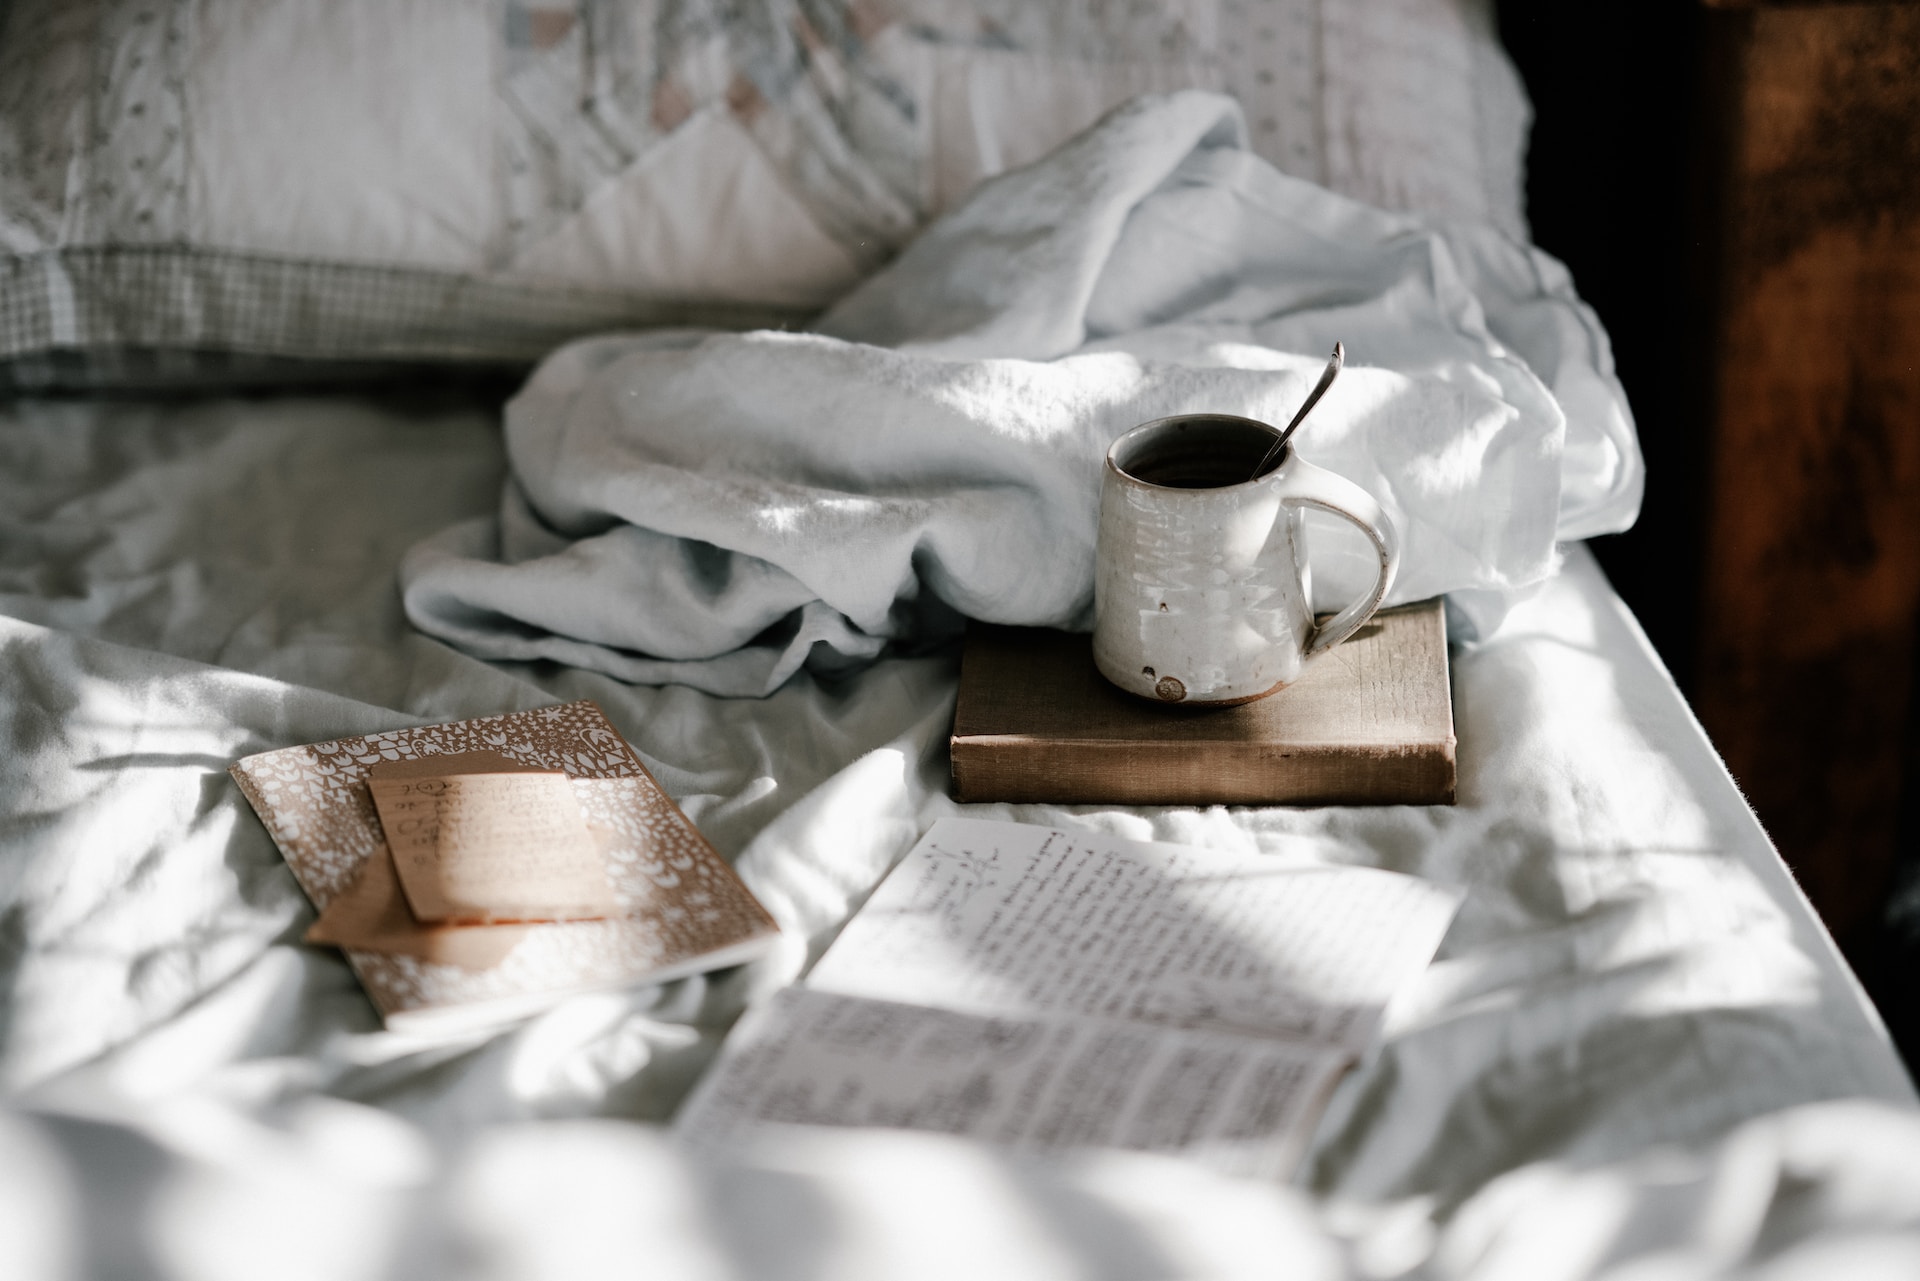 Journaling with a hot mug in a cozy bed. Image by Annie Spratt